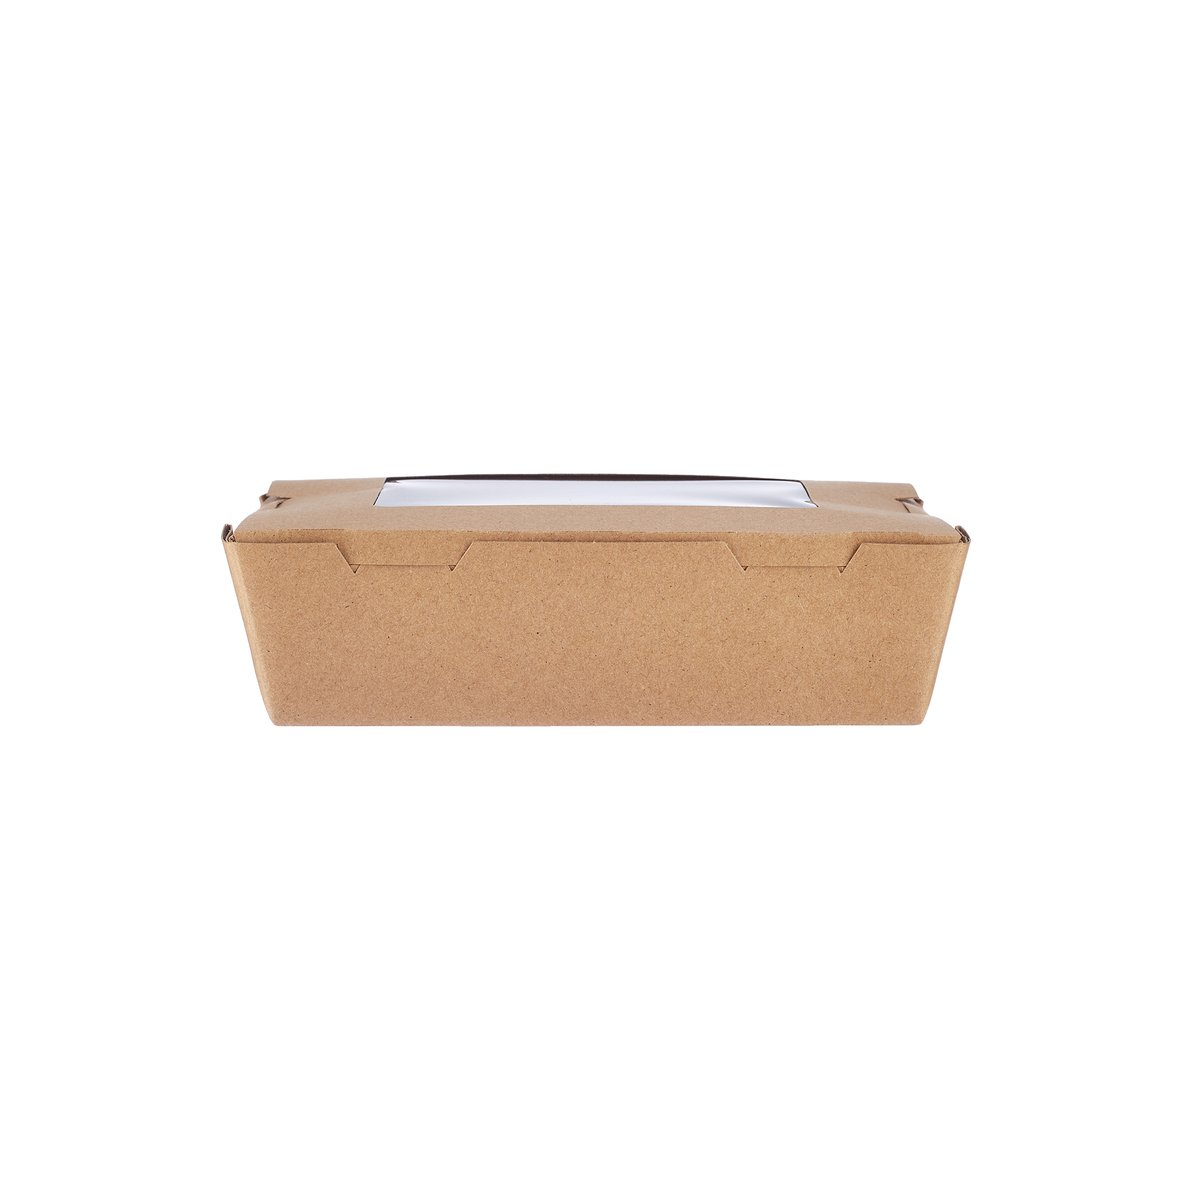 Hotpack Kraft Paper Lunch Box with Window 5pcs